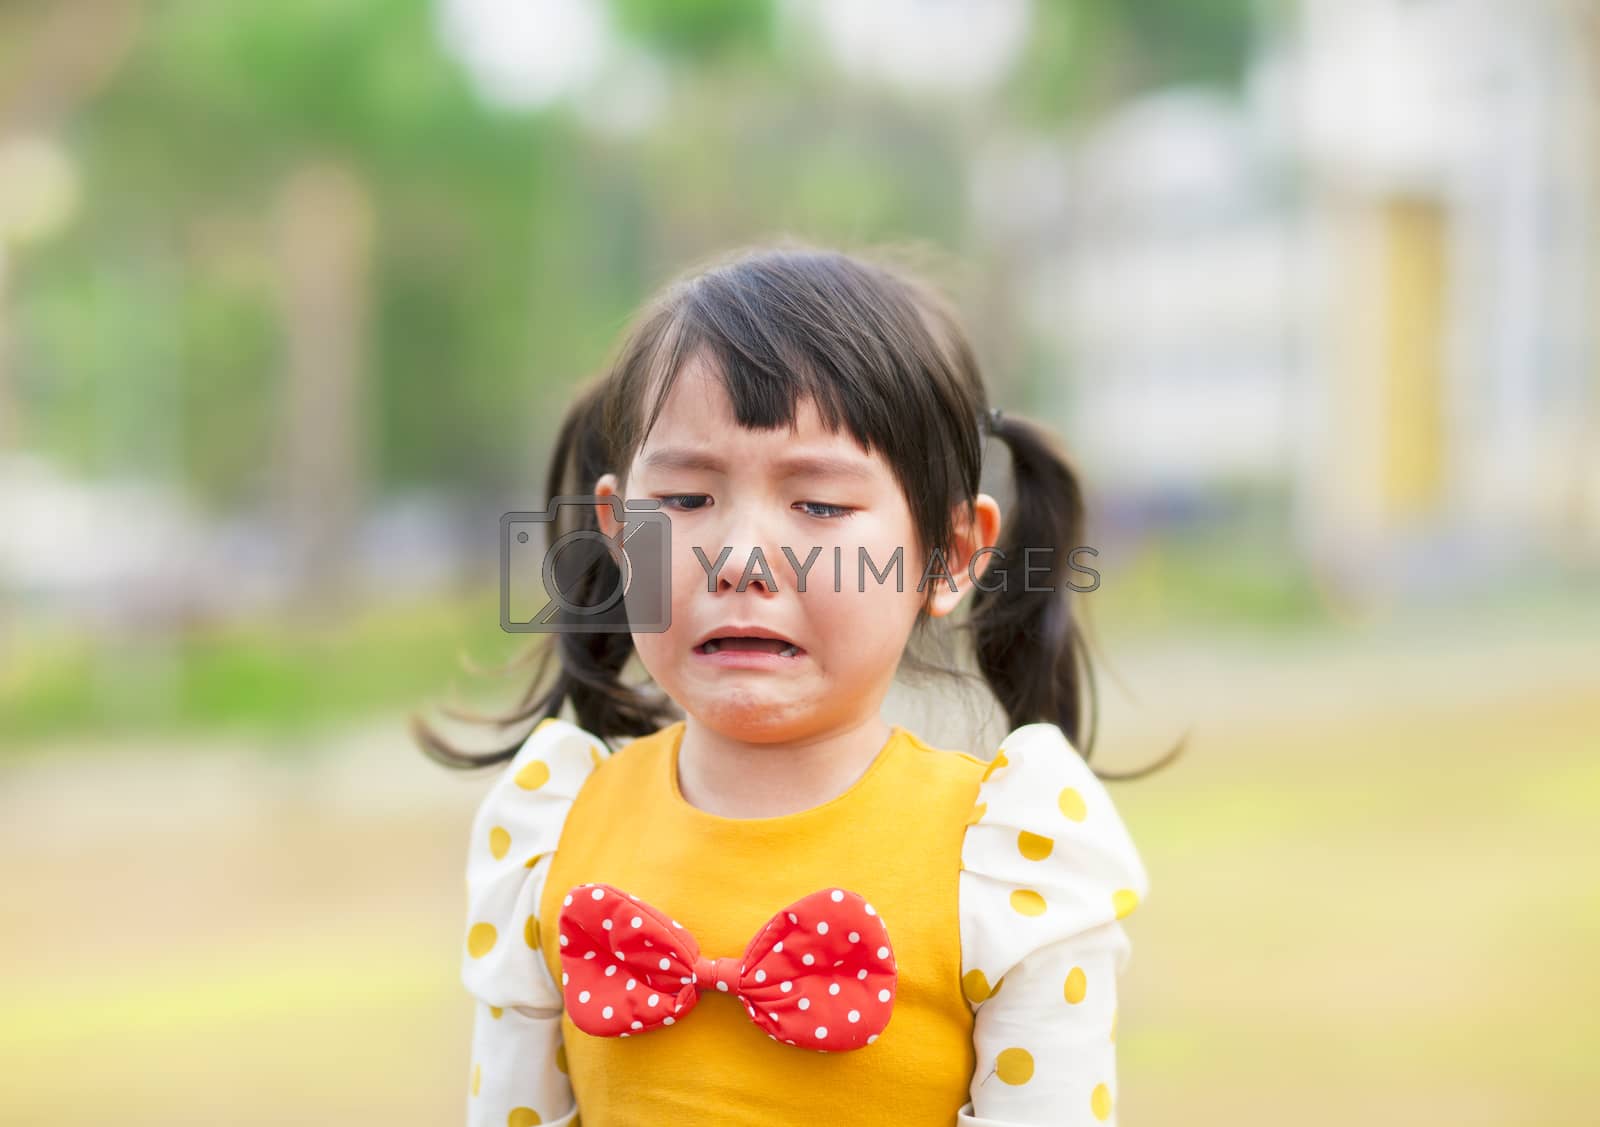 Royalty free image of crying little girl in the park by tomwang